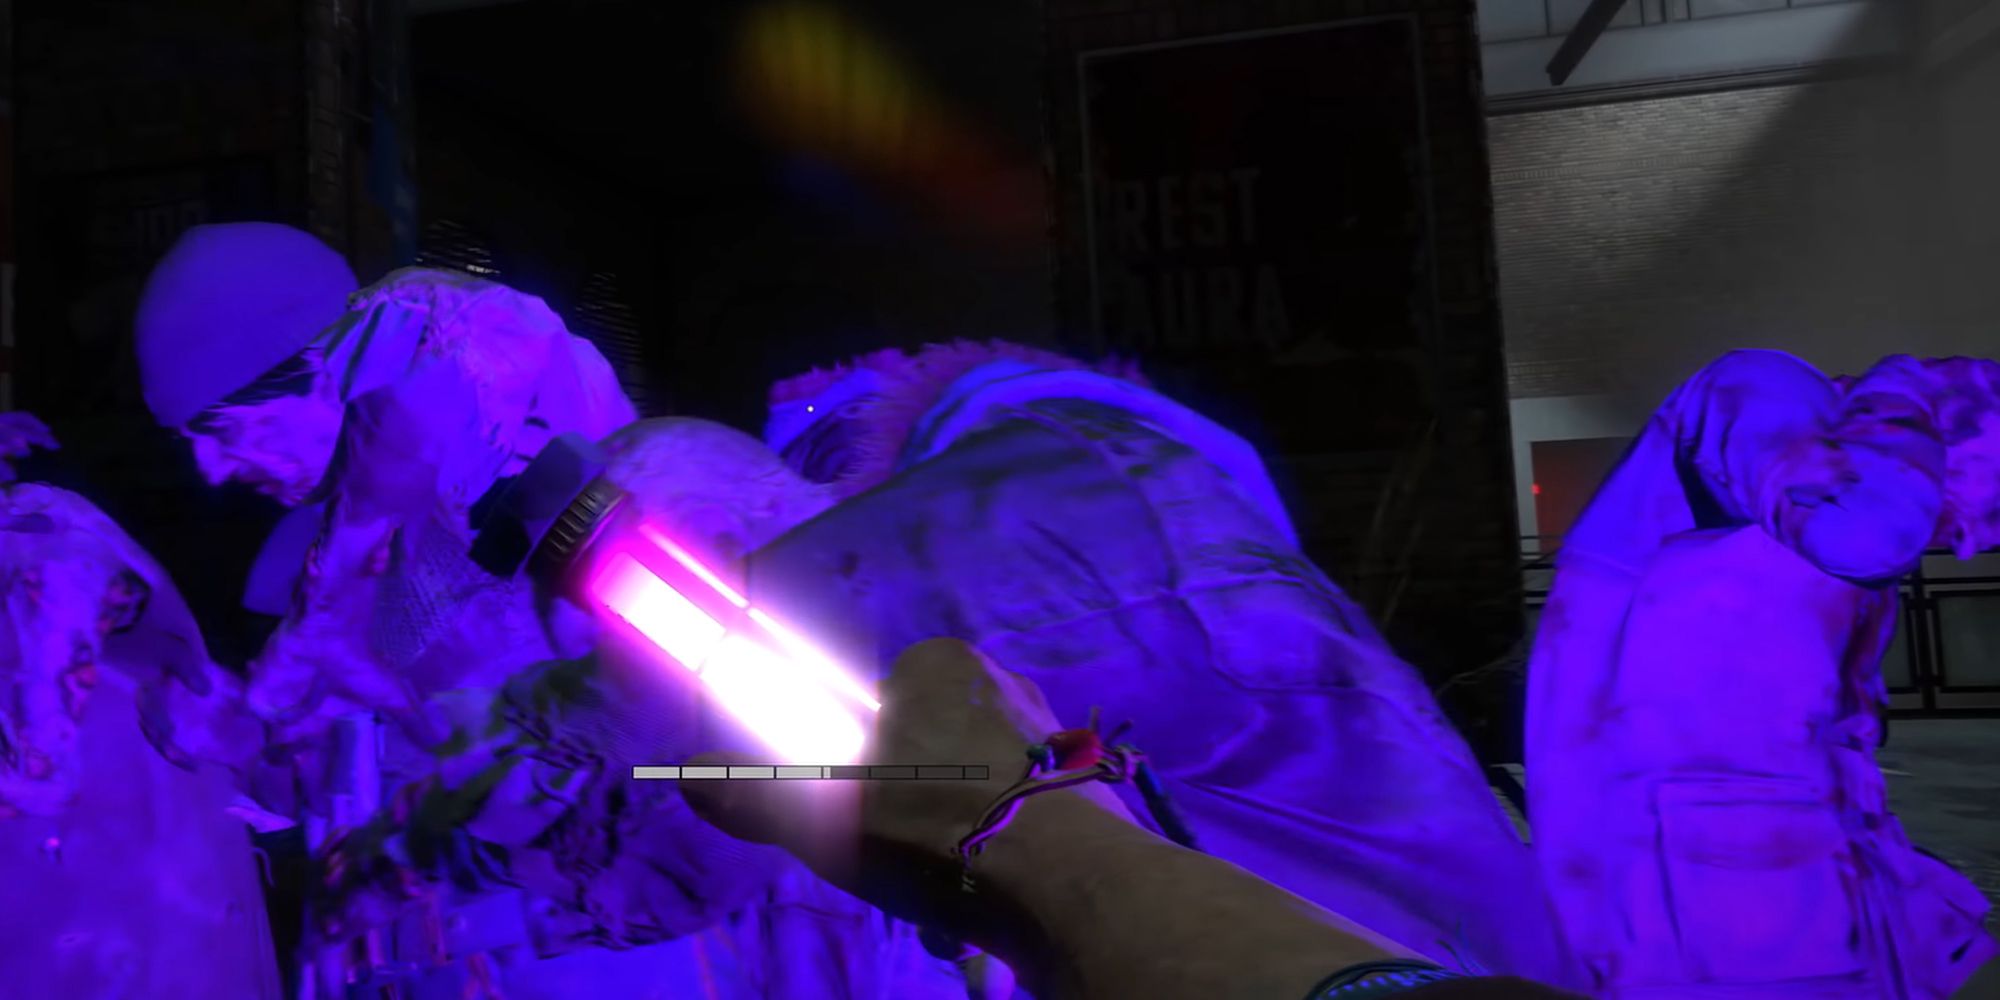 Dying Light 2 - Using A UV Bar To Scare Away Infected From The 2019 E3 Trailer